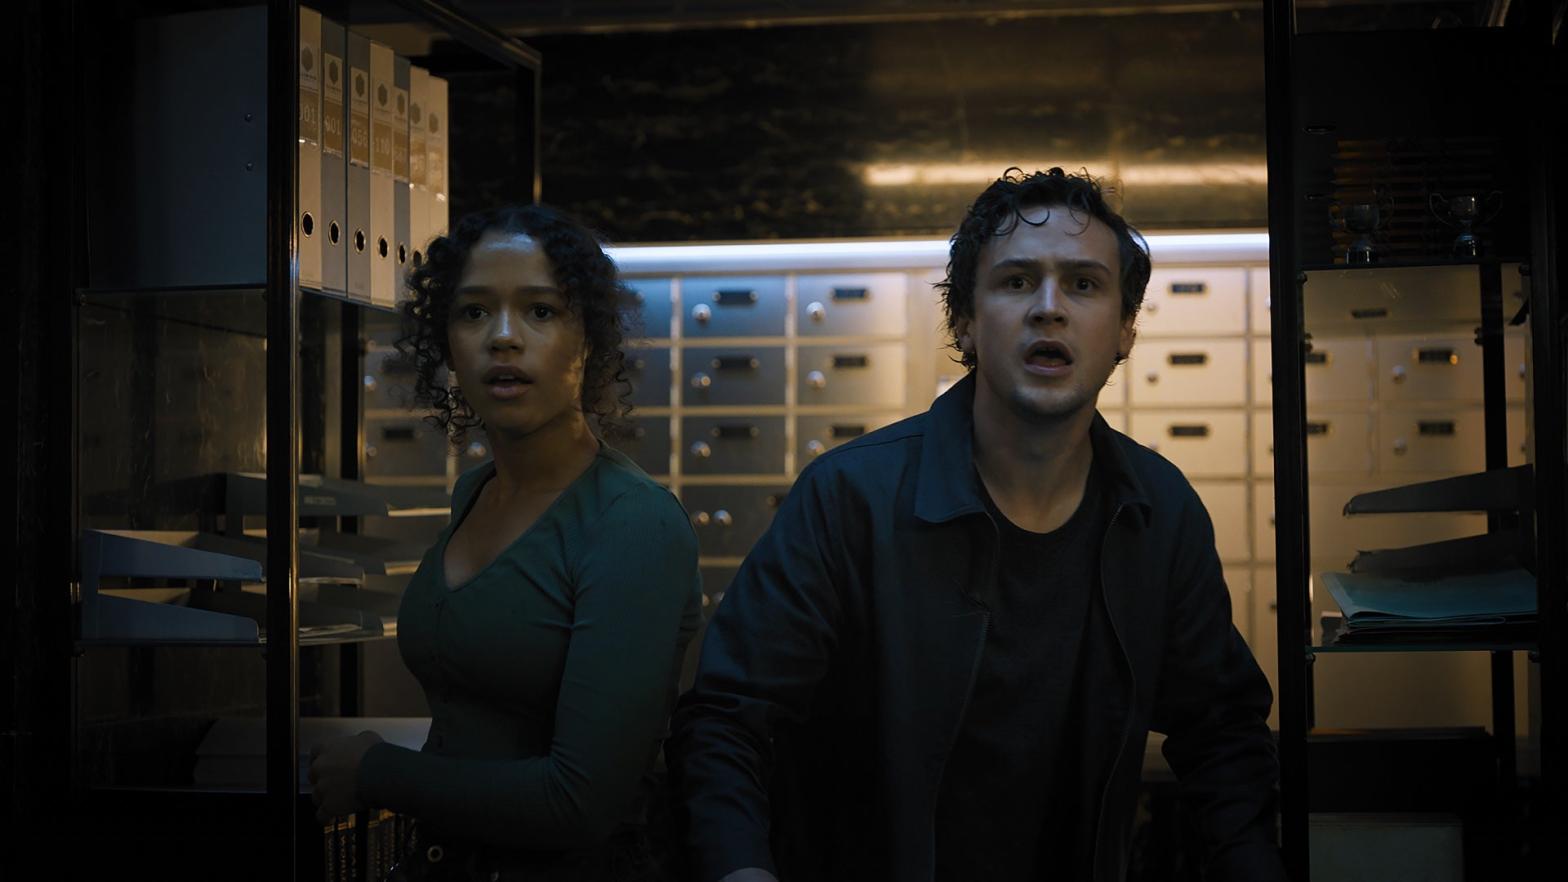 Zoey Davis (Taylor Russell) and Ben Miller (Logan Miller) in Escape Room: Tournament of Champions. (Photo: Sony Pictures)